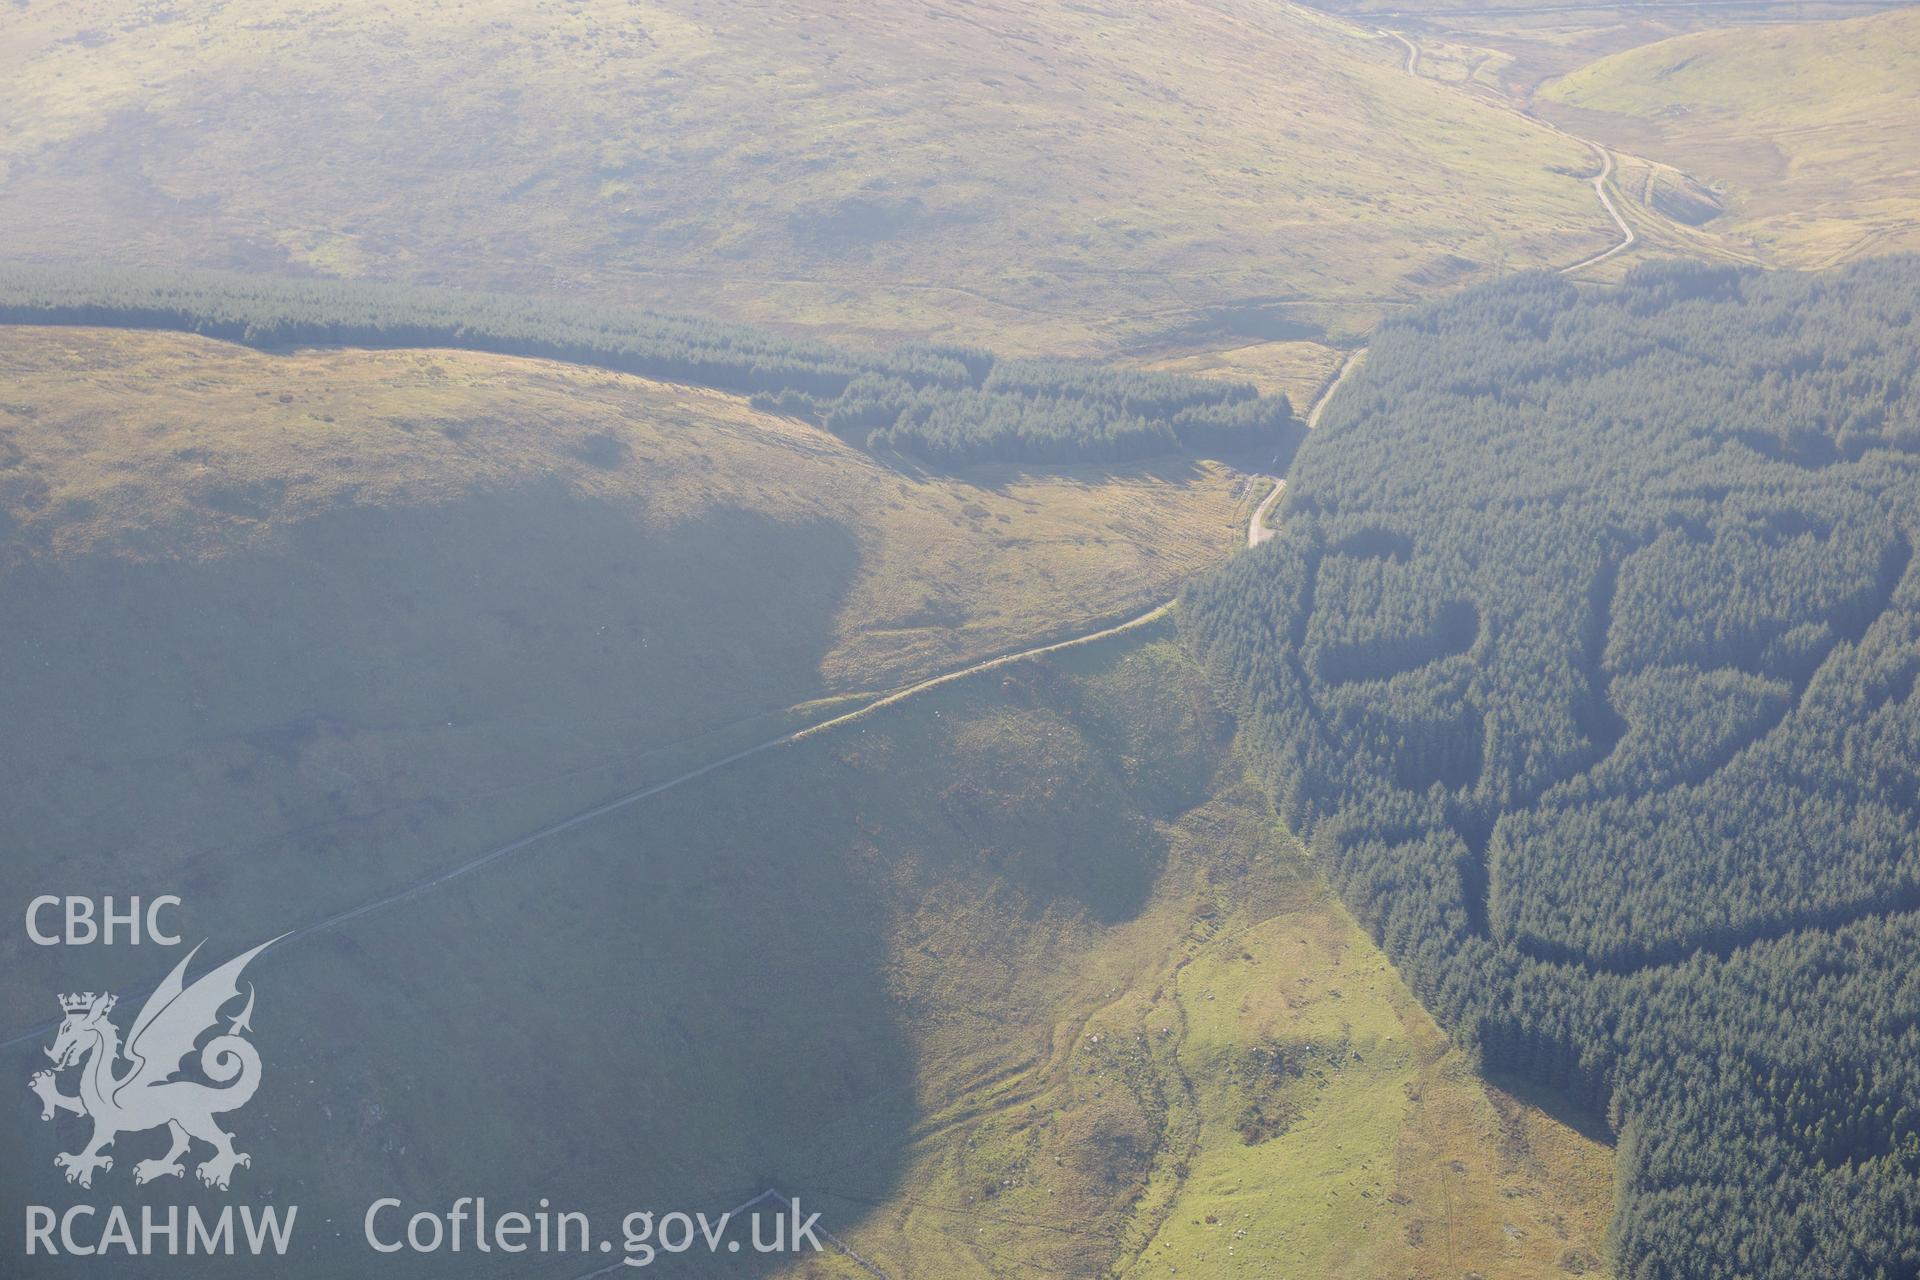 Bedd-y-Brenin cairn and cist, hidden in trees a mile and a half south east of Fairbourne. Oblique aerial photograph taken during the Royal Commission's programme of archaeological aerial reconnaissance by Toby Driver on 2nd October 2015.